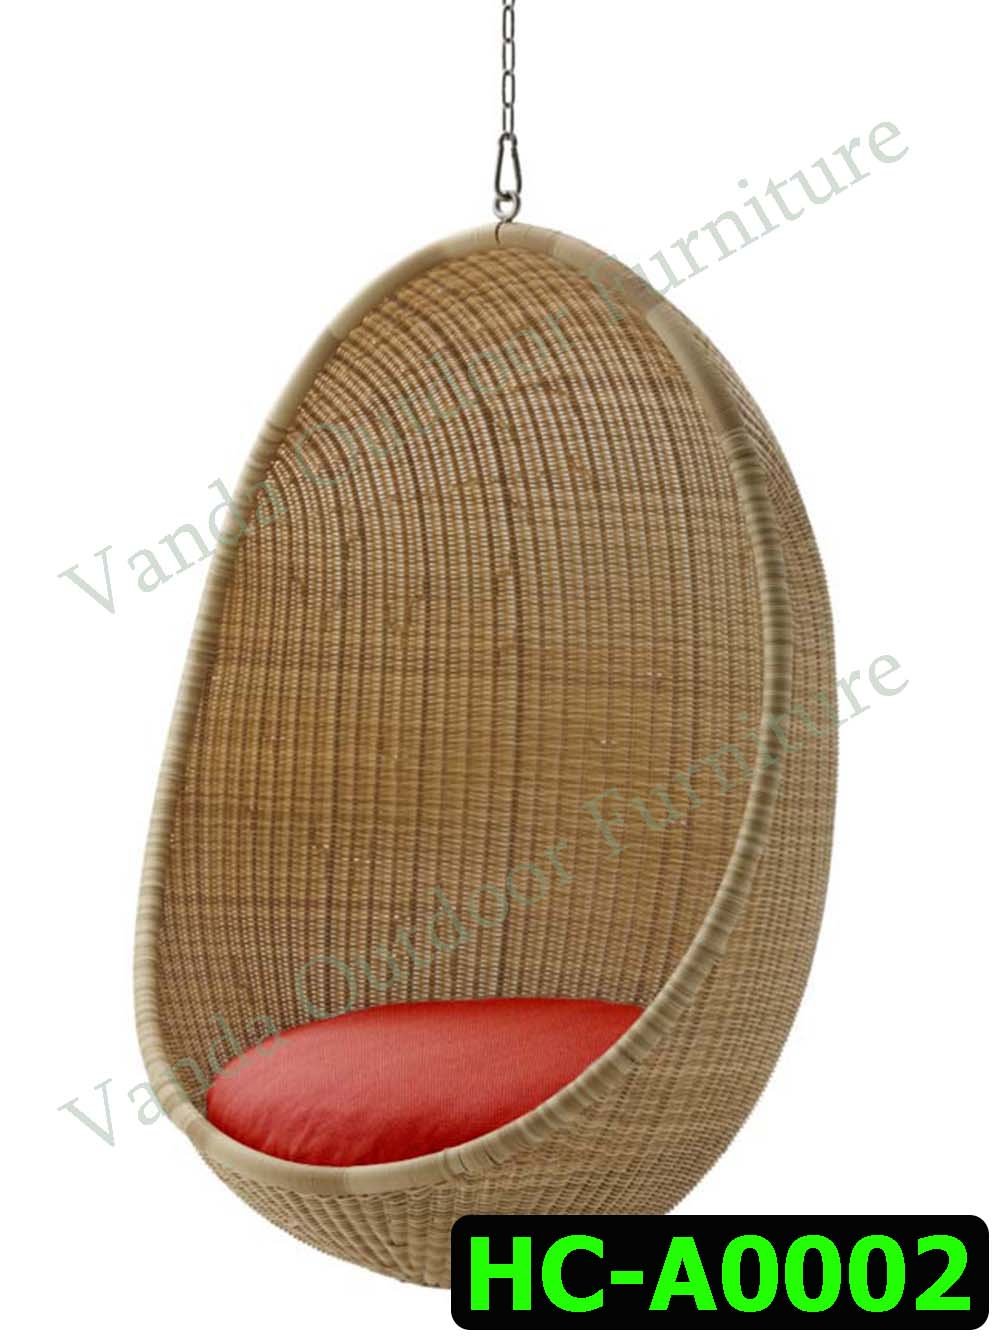 Rattan Swing Chair Product code HC-A0002